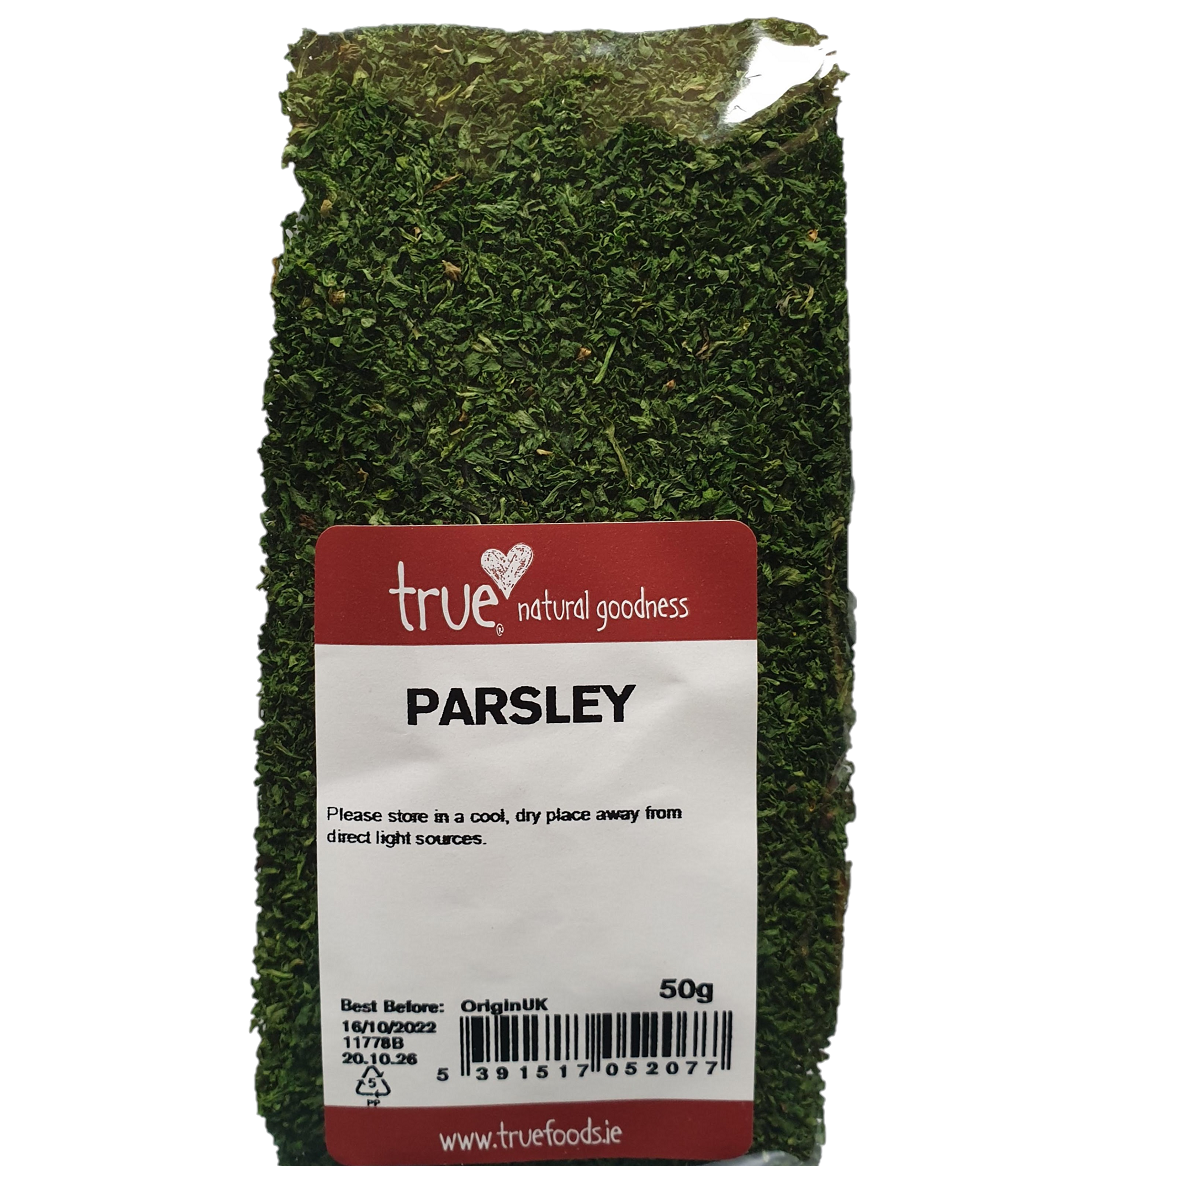 True Natural Goodness Parsley 50g